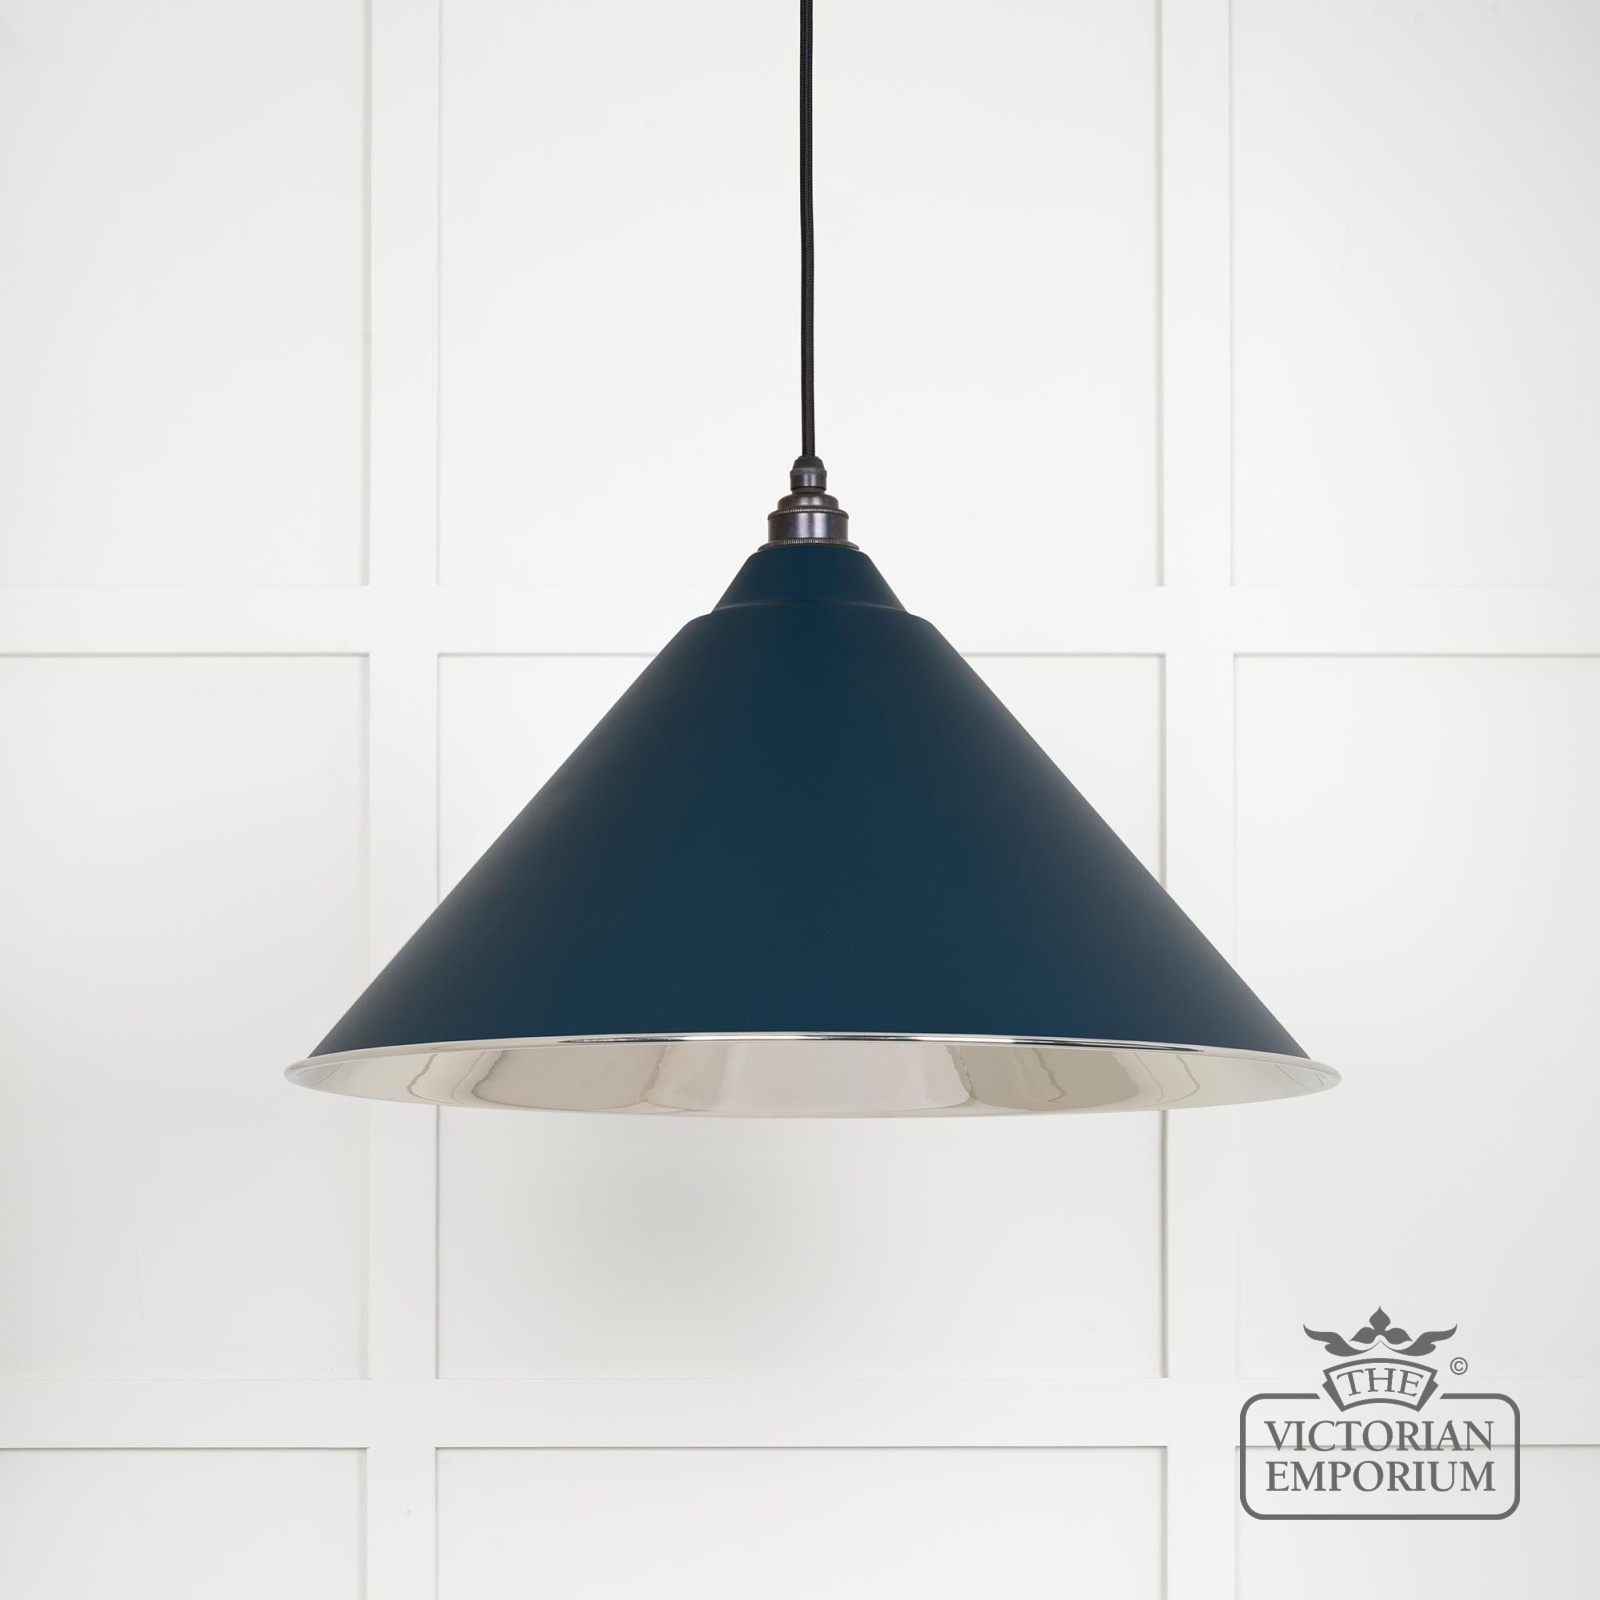 Hockliffe pendant light in smooth nickel and Dusk exterior